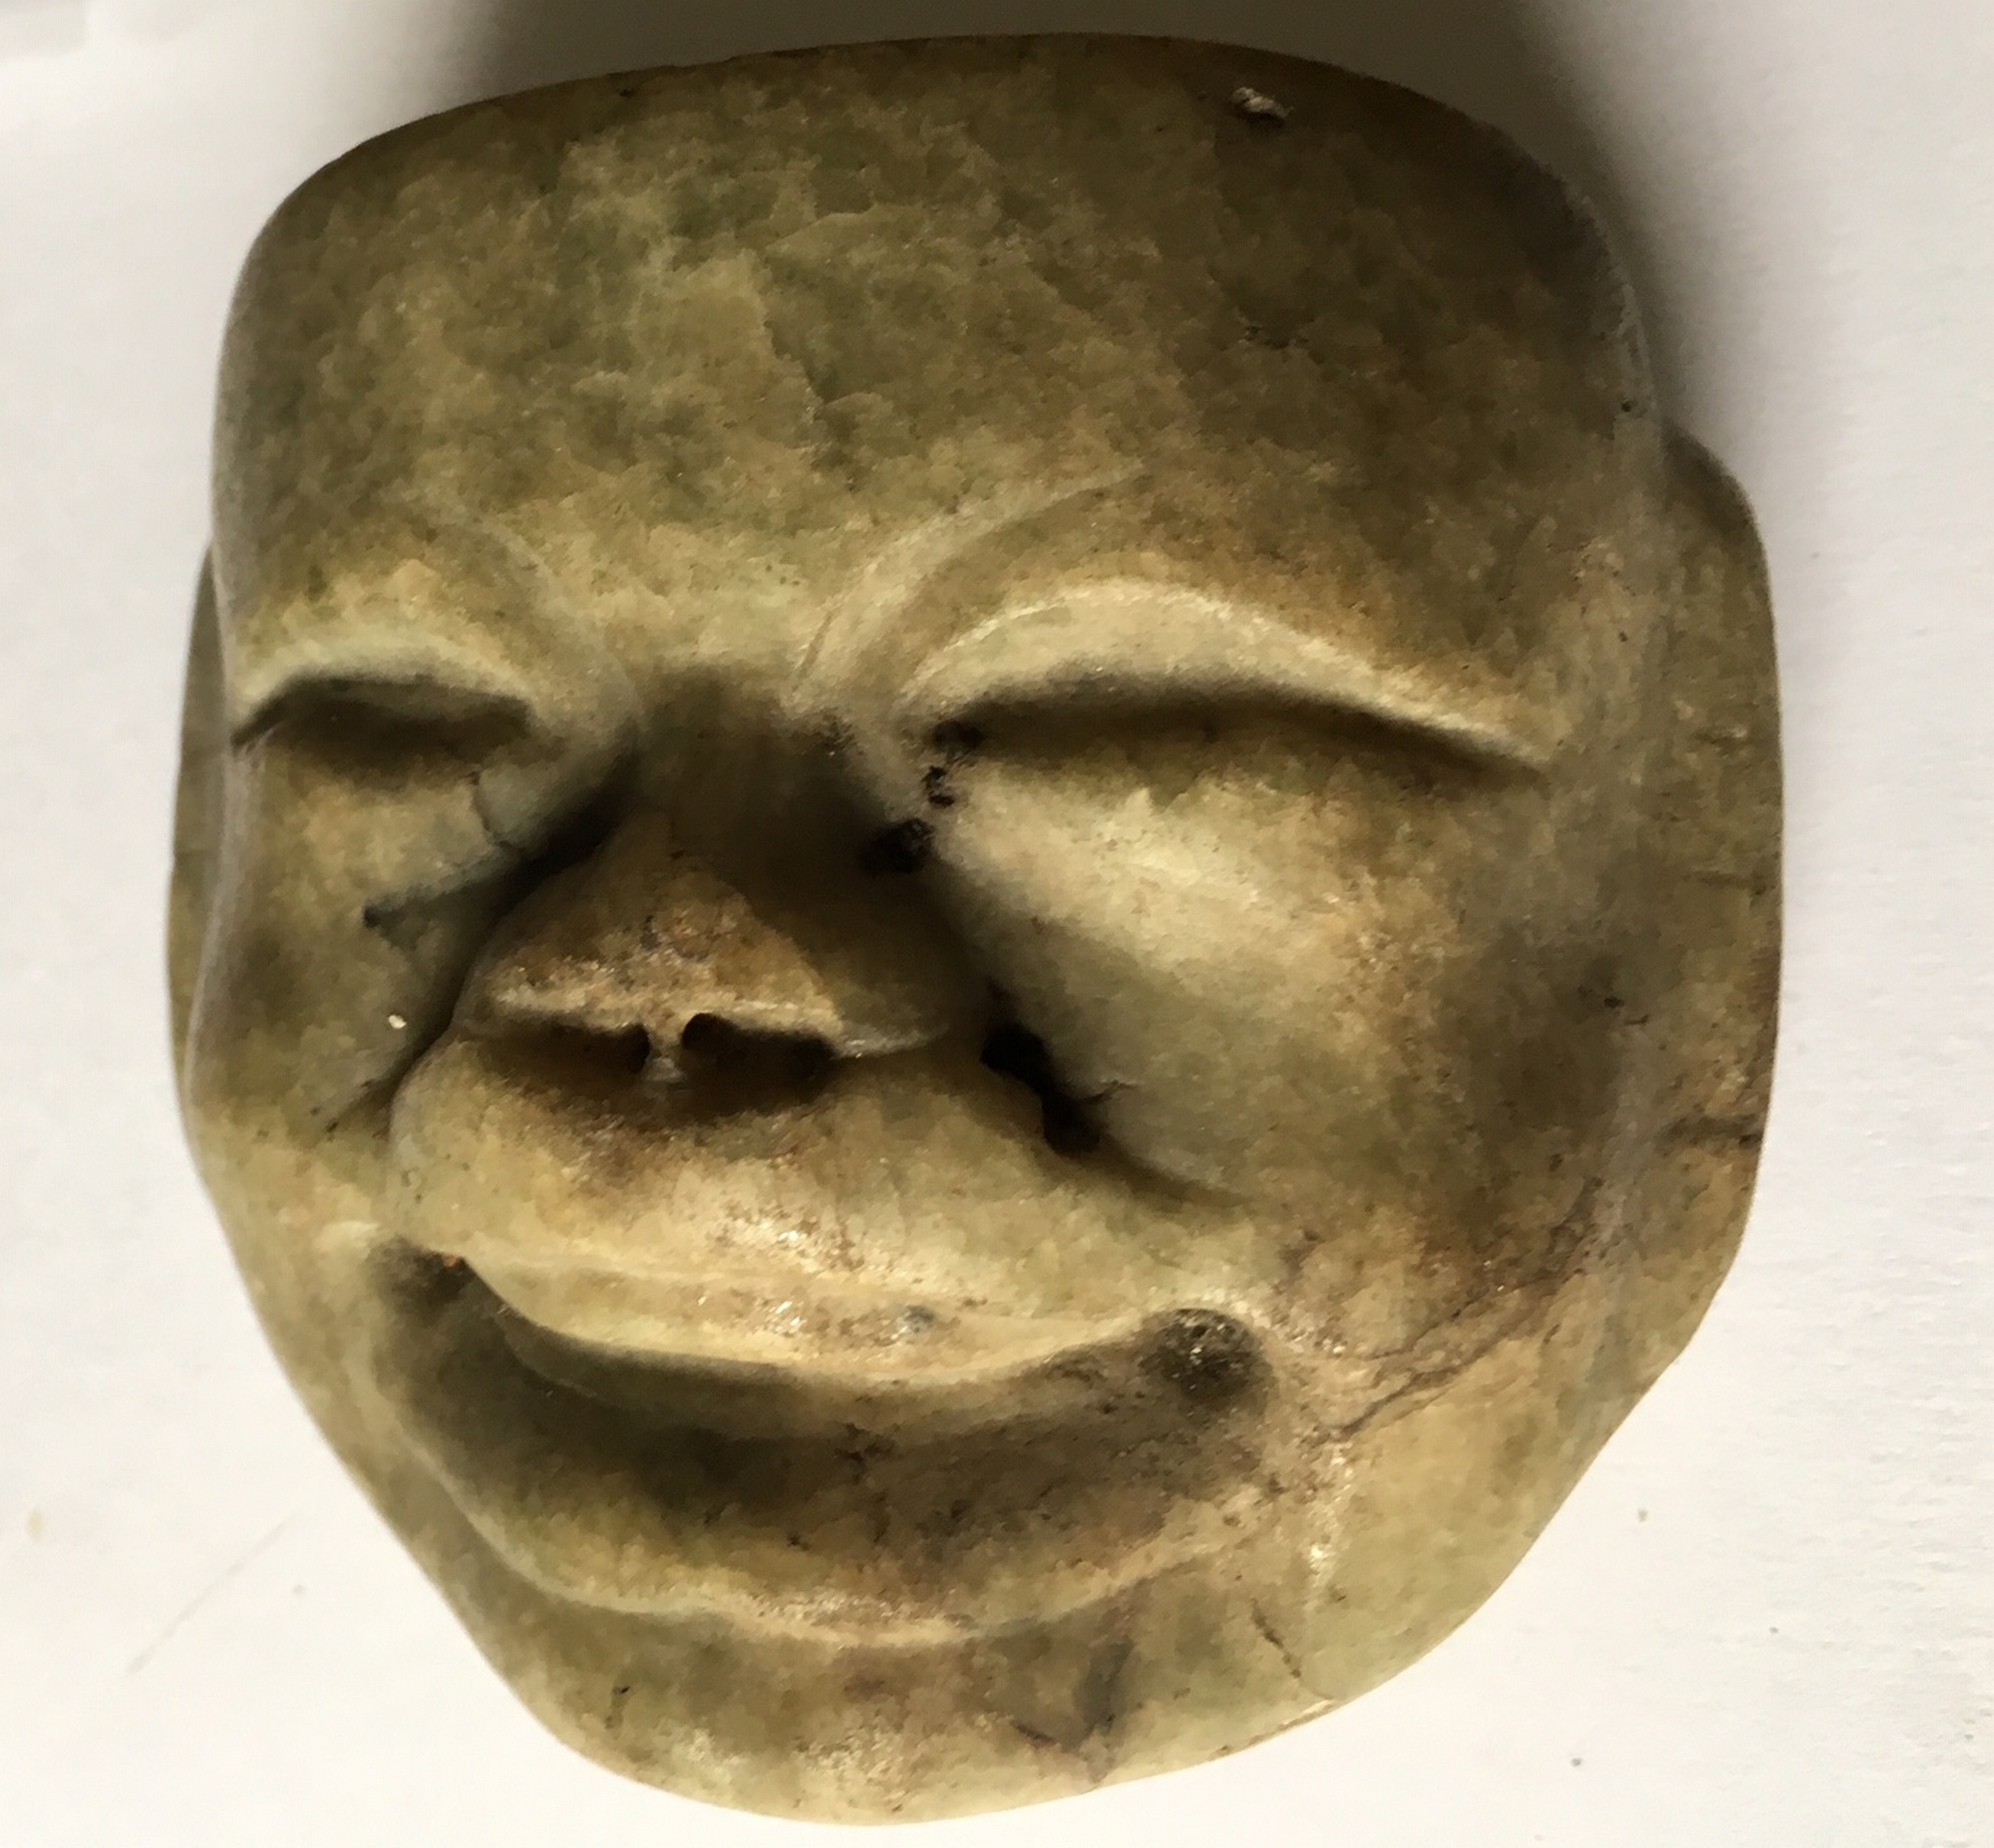 Oriental Stone Mask - 80mm x 75mm. - Image 5 of 5